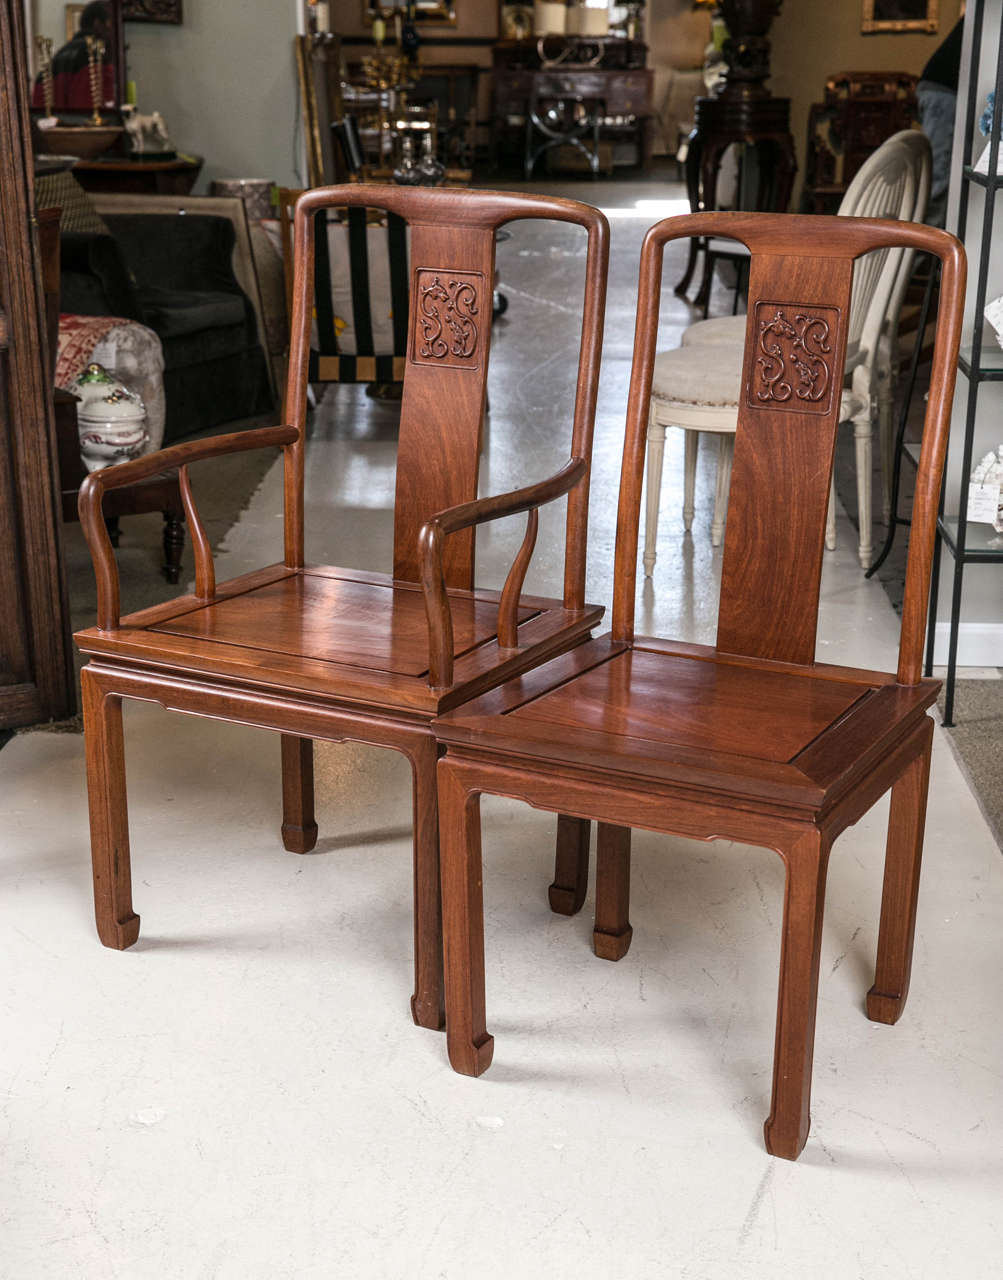 12 campherwood dining chairs Early mid 20th c. to include two arm chairs + 10 side chairs each with carved splat.  Provenance from Seitz family owners of Shanghai Lumber Co.